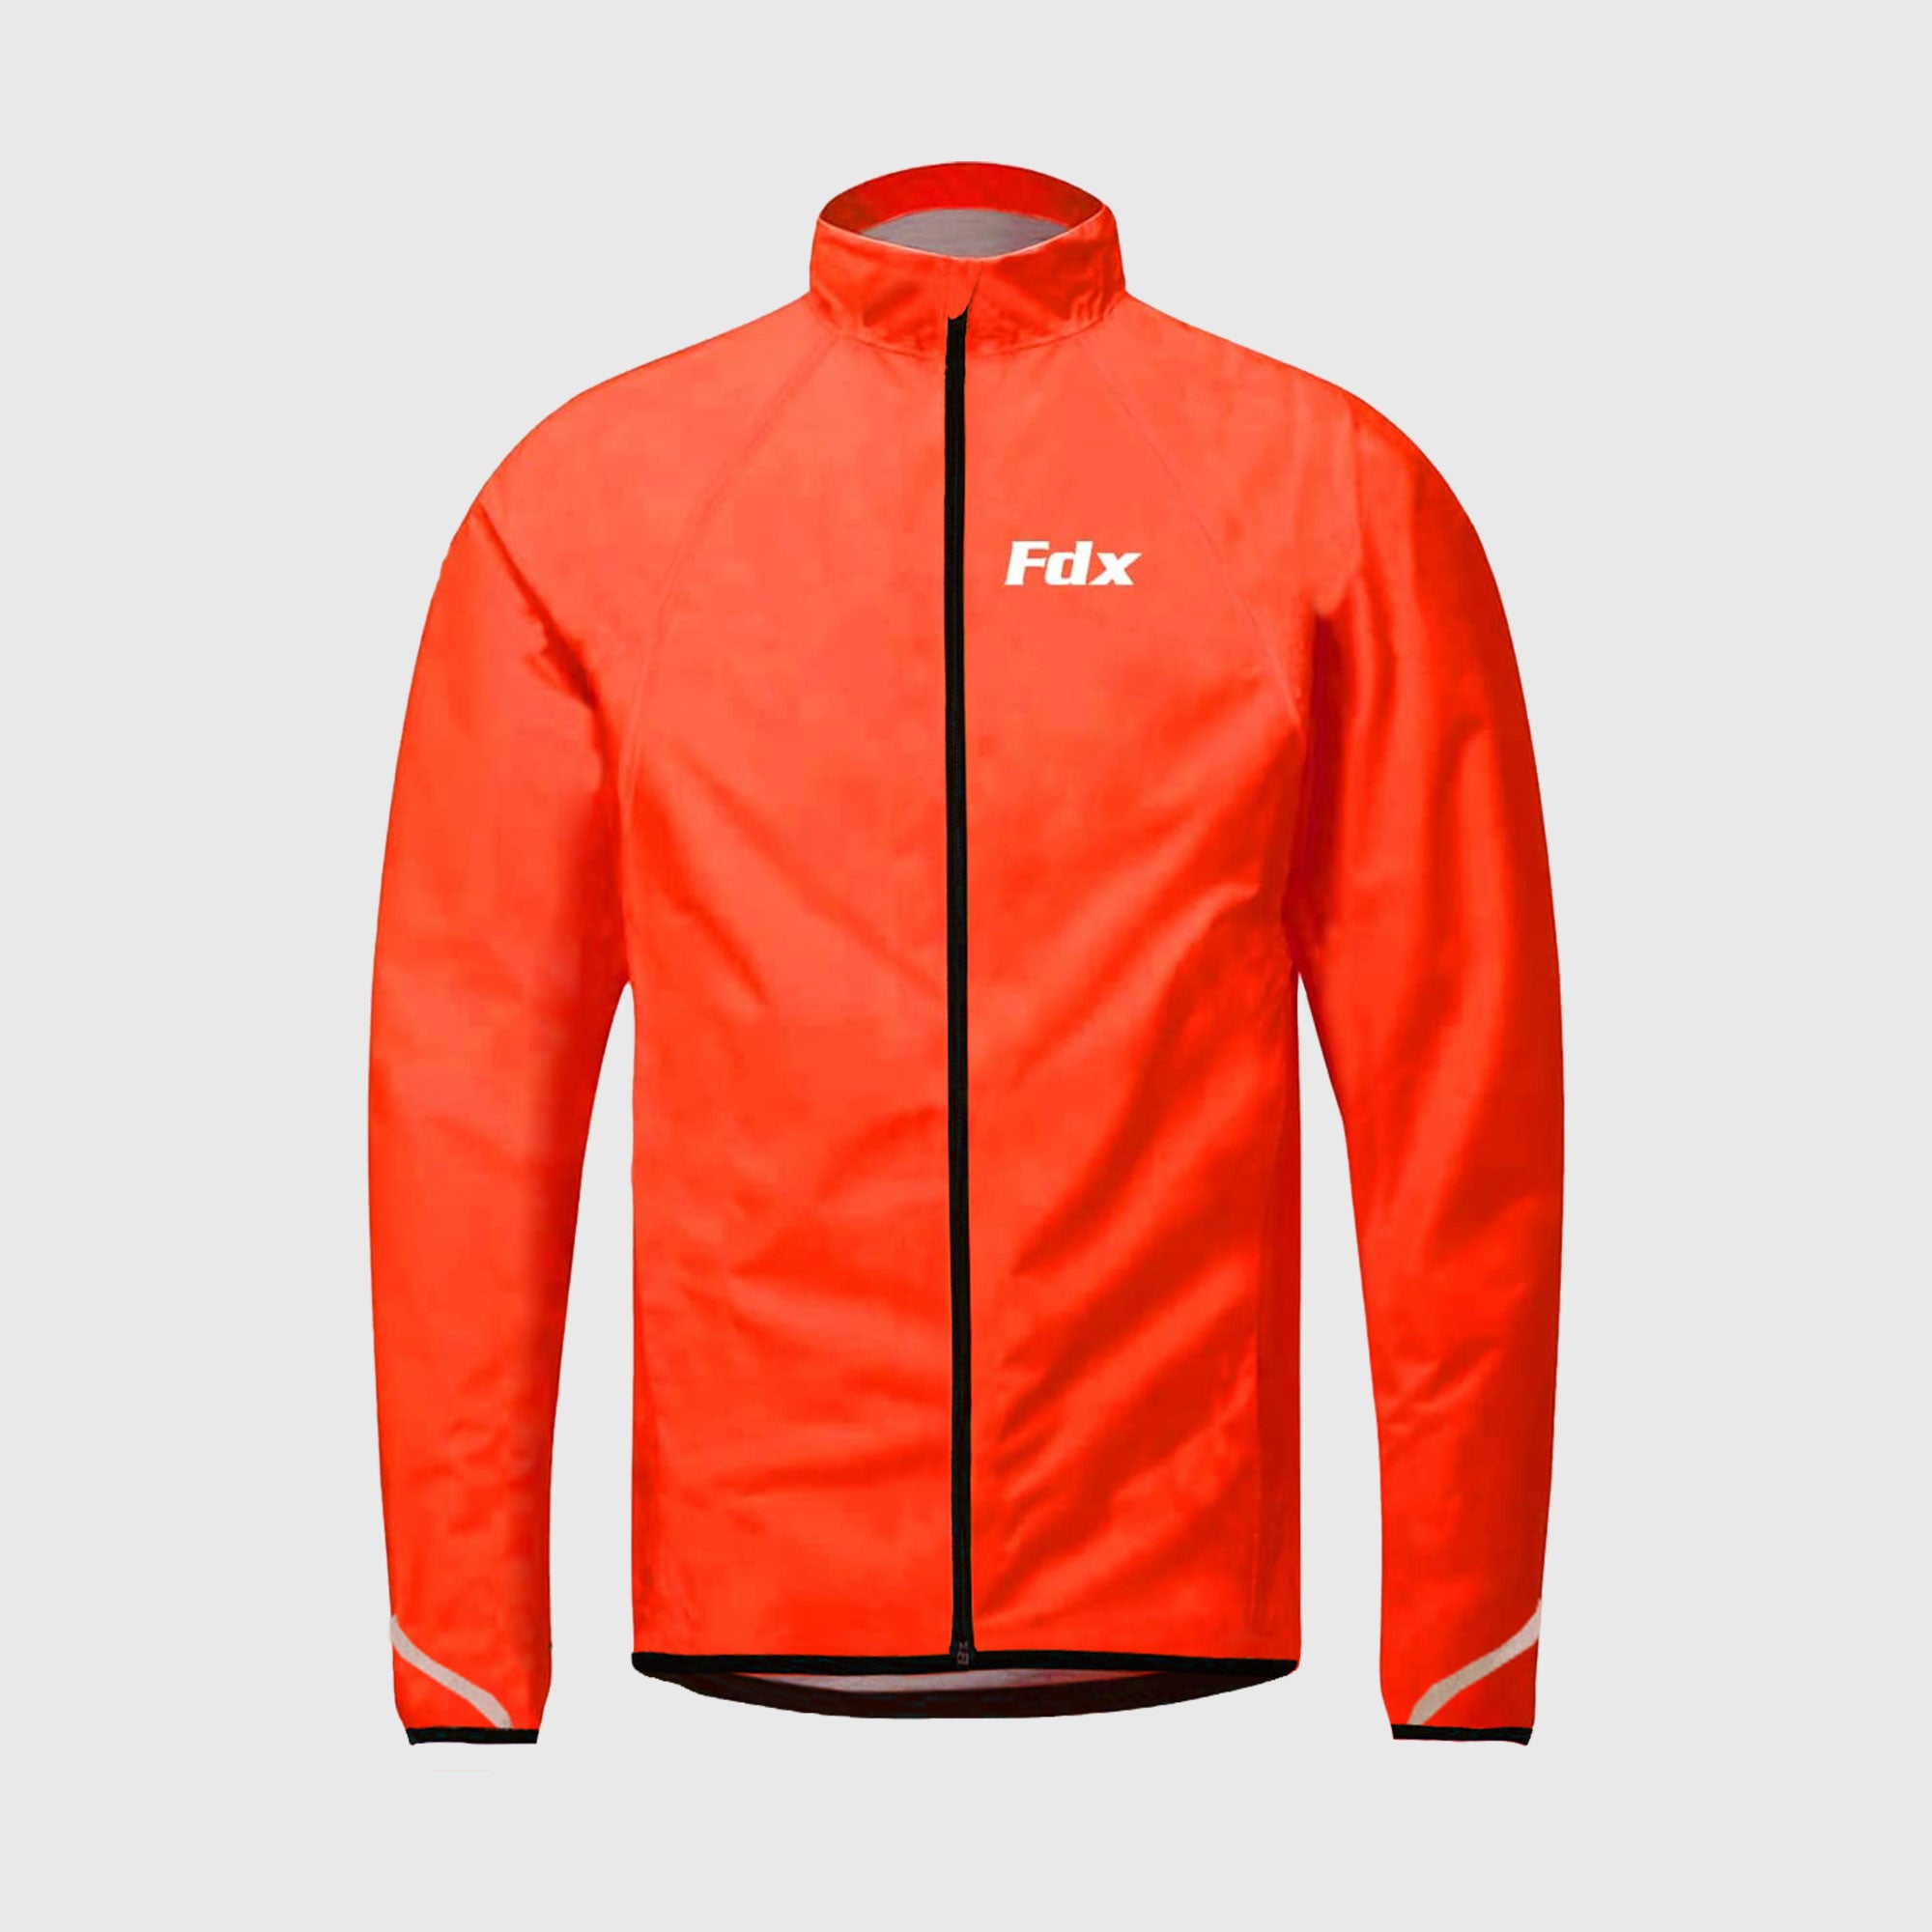 Fdx Men's Red Cycling Jacket for Winter Thermal Casual Softshell Clothing Lightweight, Shaverproof, Packable ,Windproof, Waterproof & Pockets